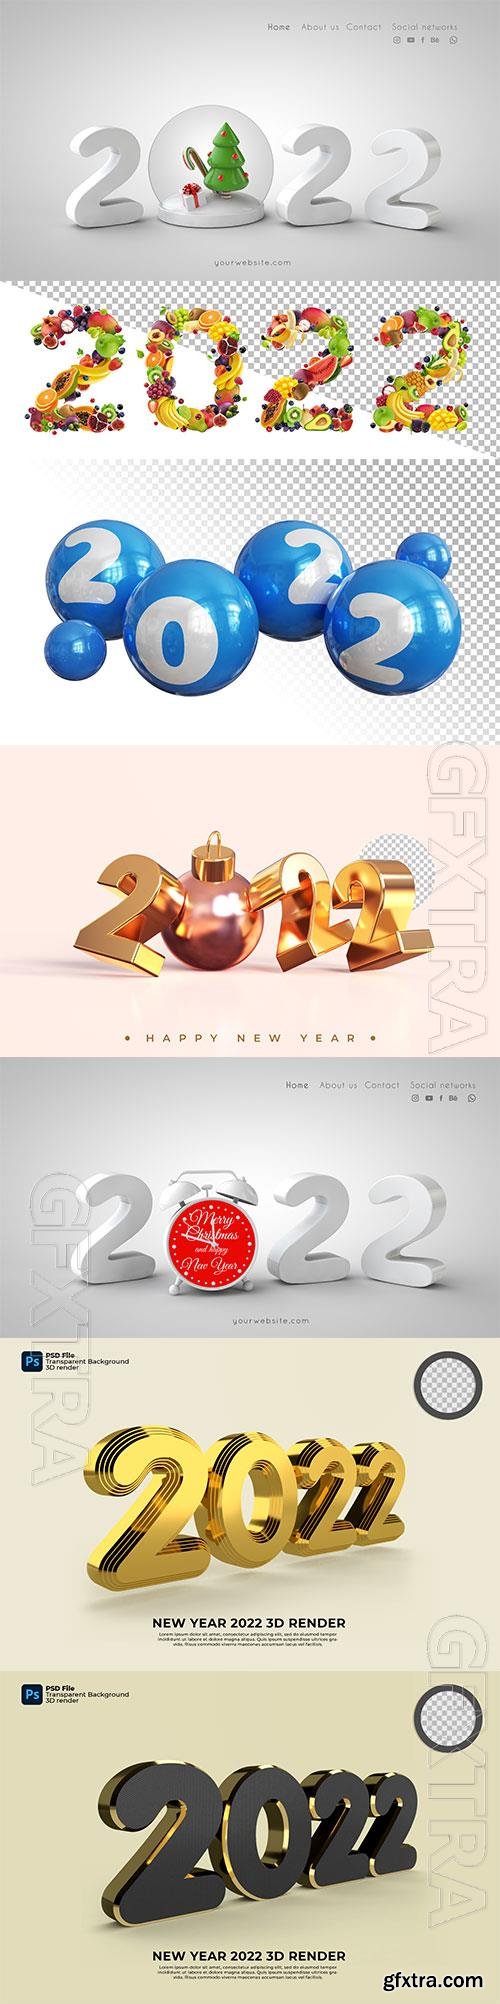 Happy new year 2022 3d rendering isolated on transparent background with psd